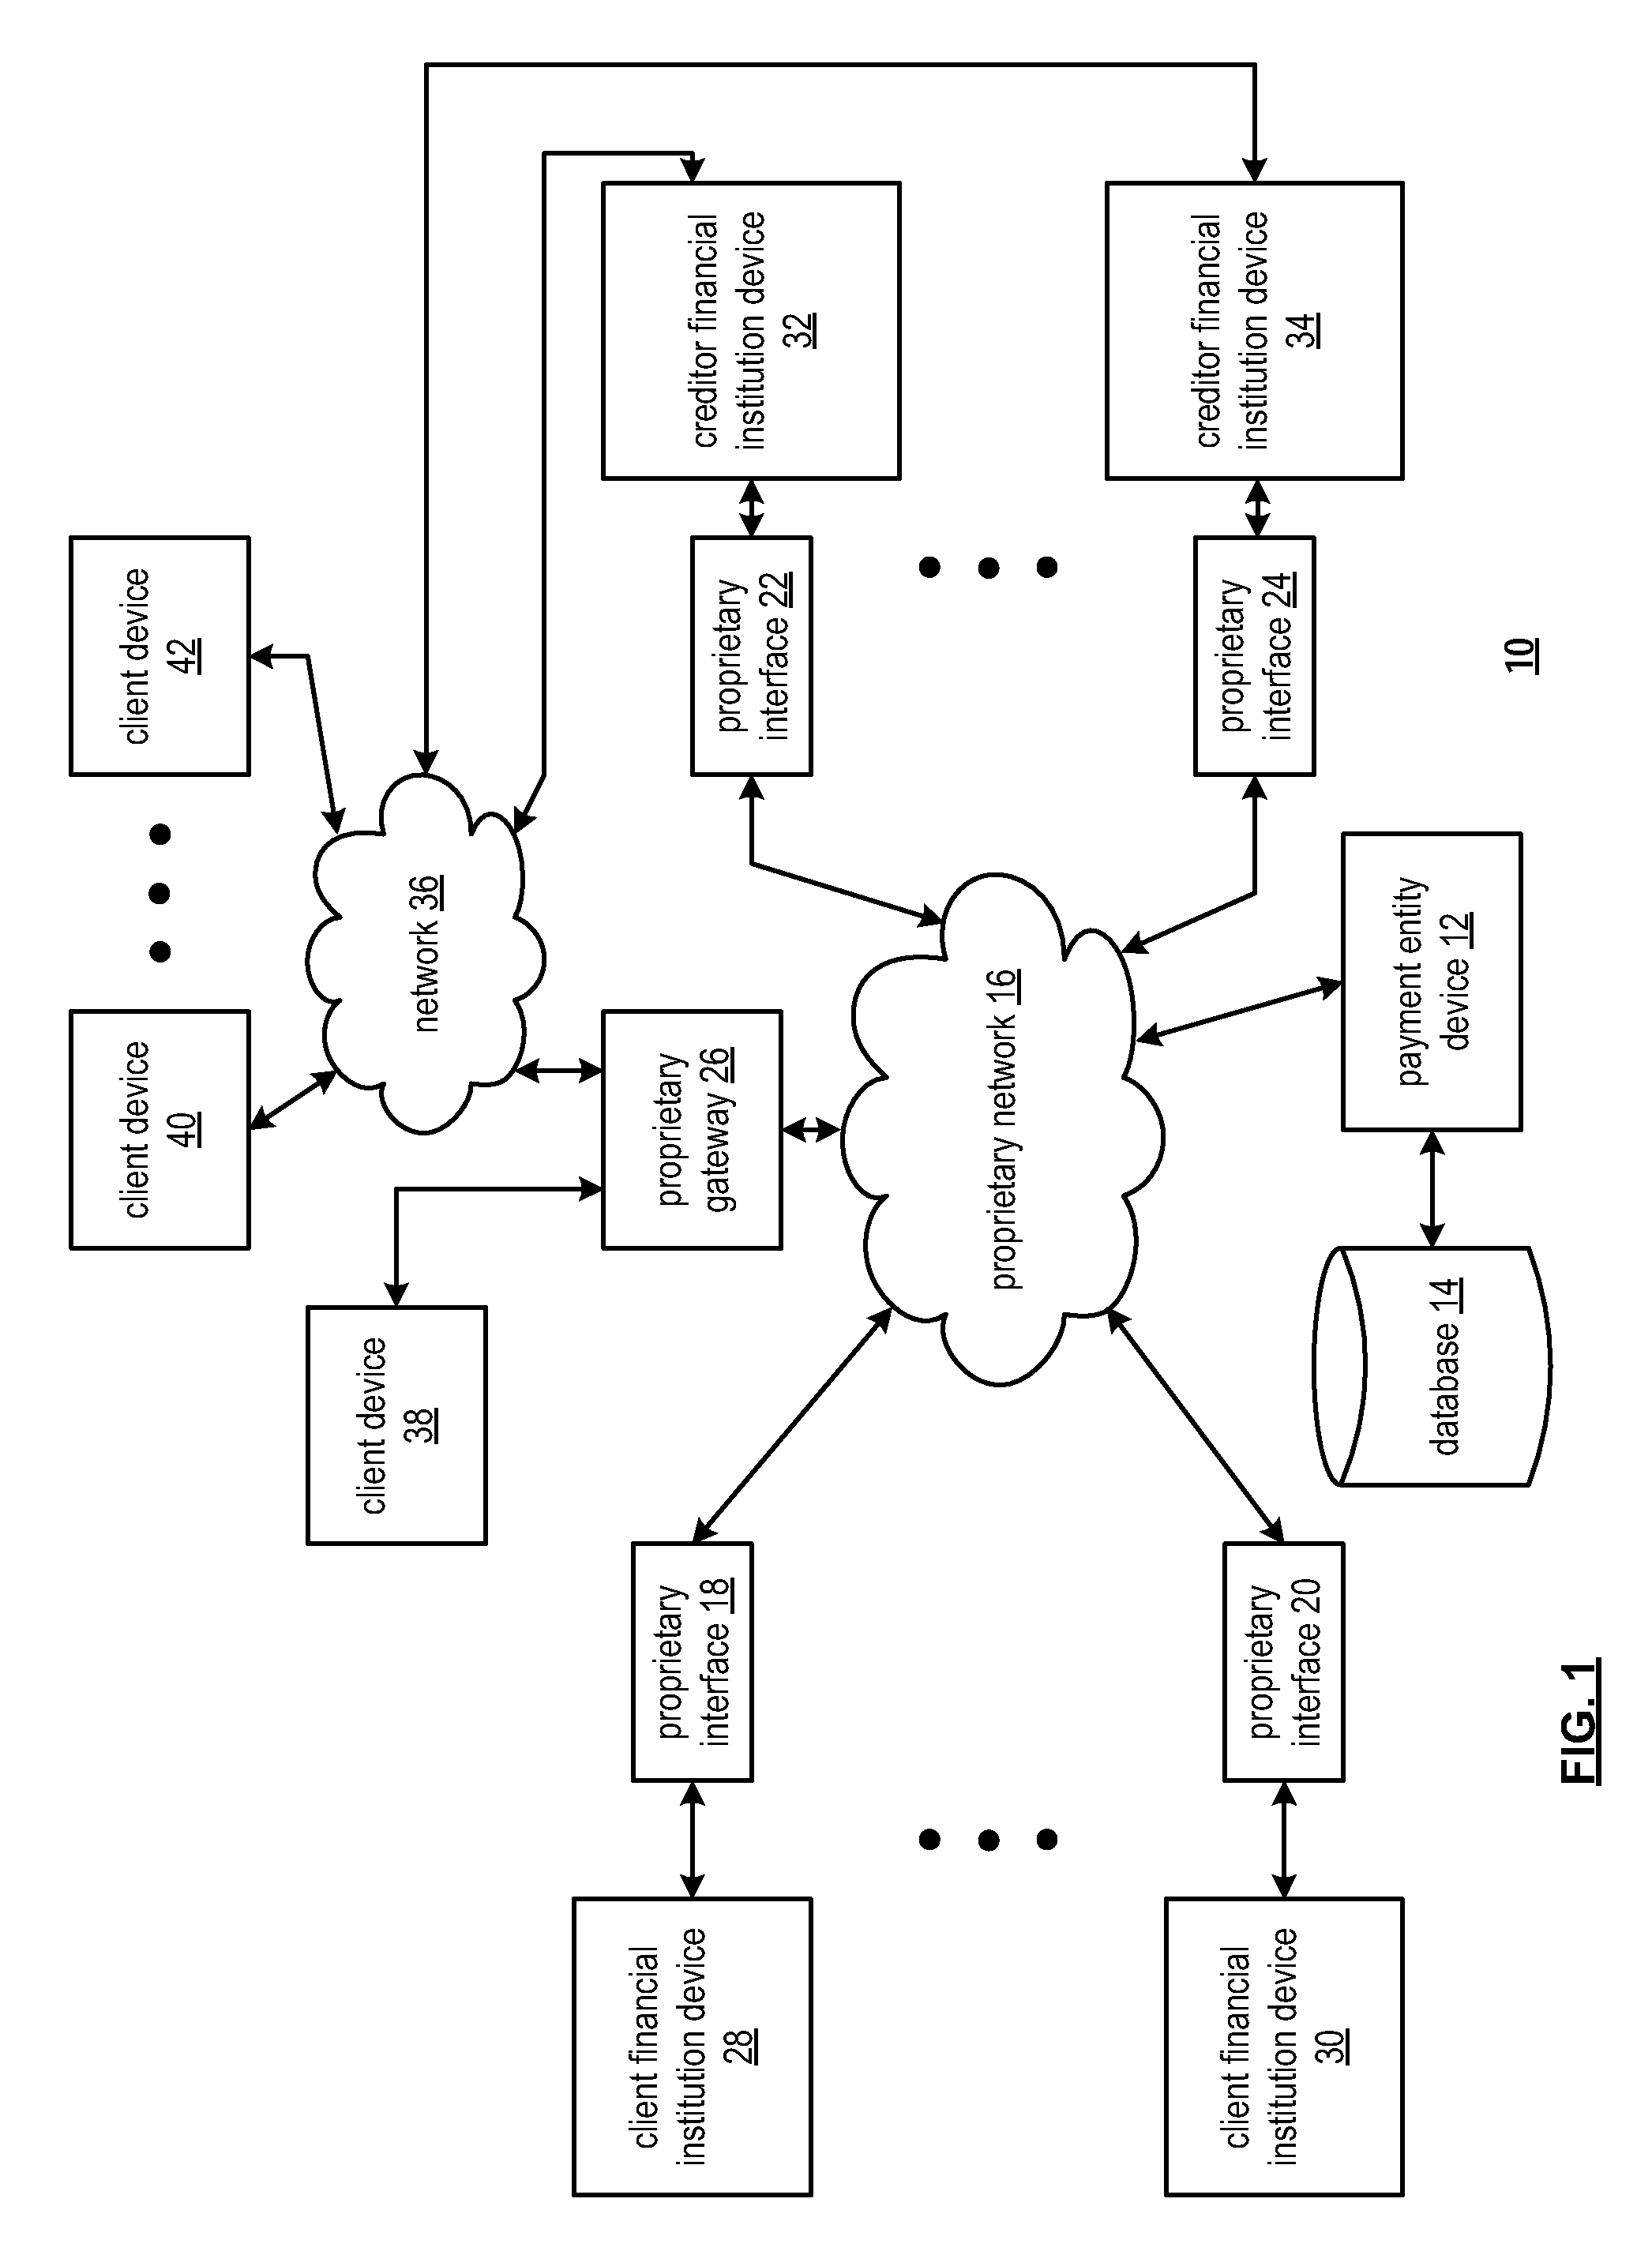 Payment entity device transaction processing using multiple payment methods